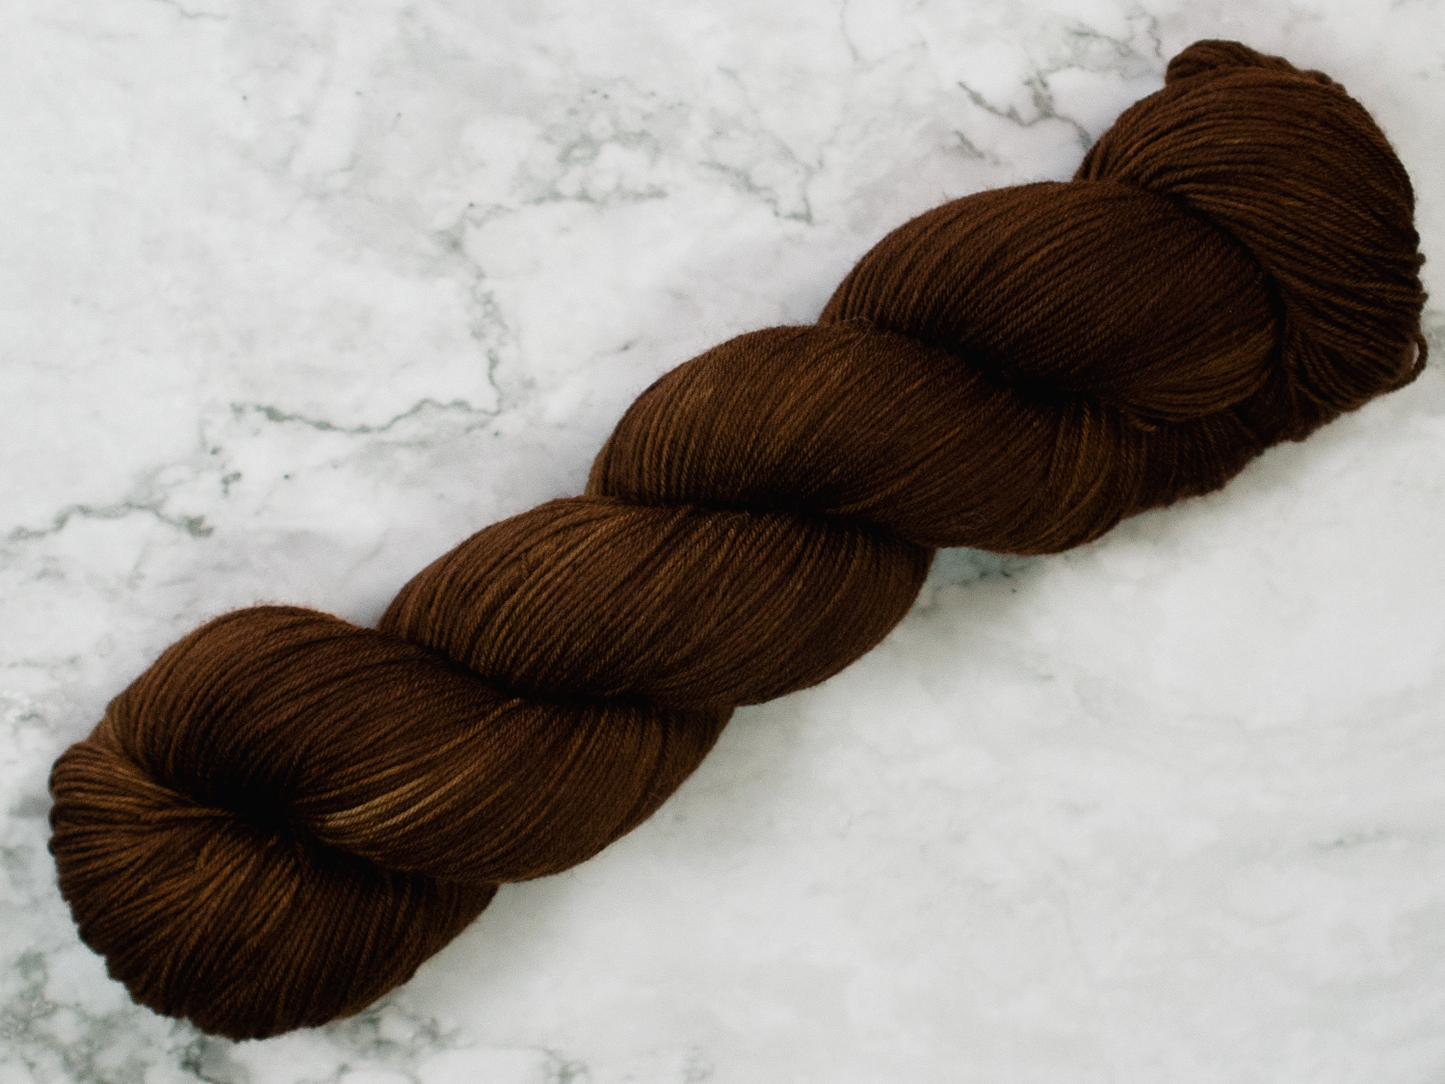 Photo of Fingering Weight yarn in "Snuffy"